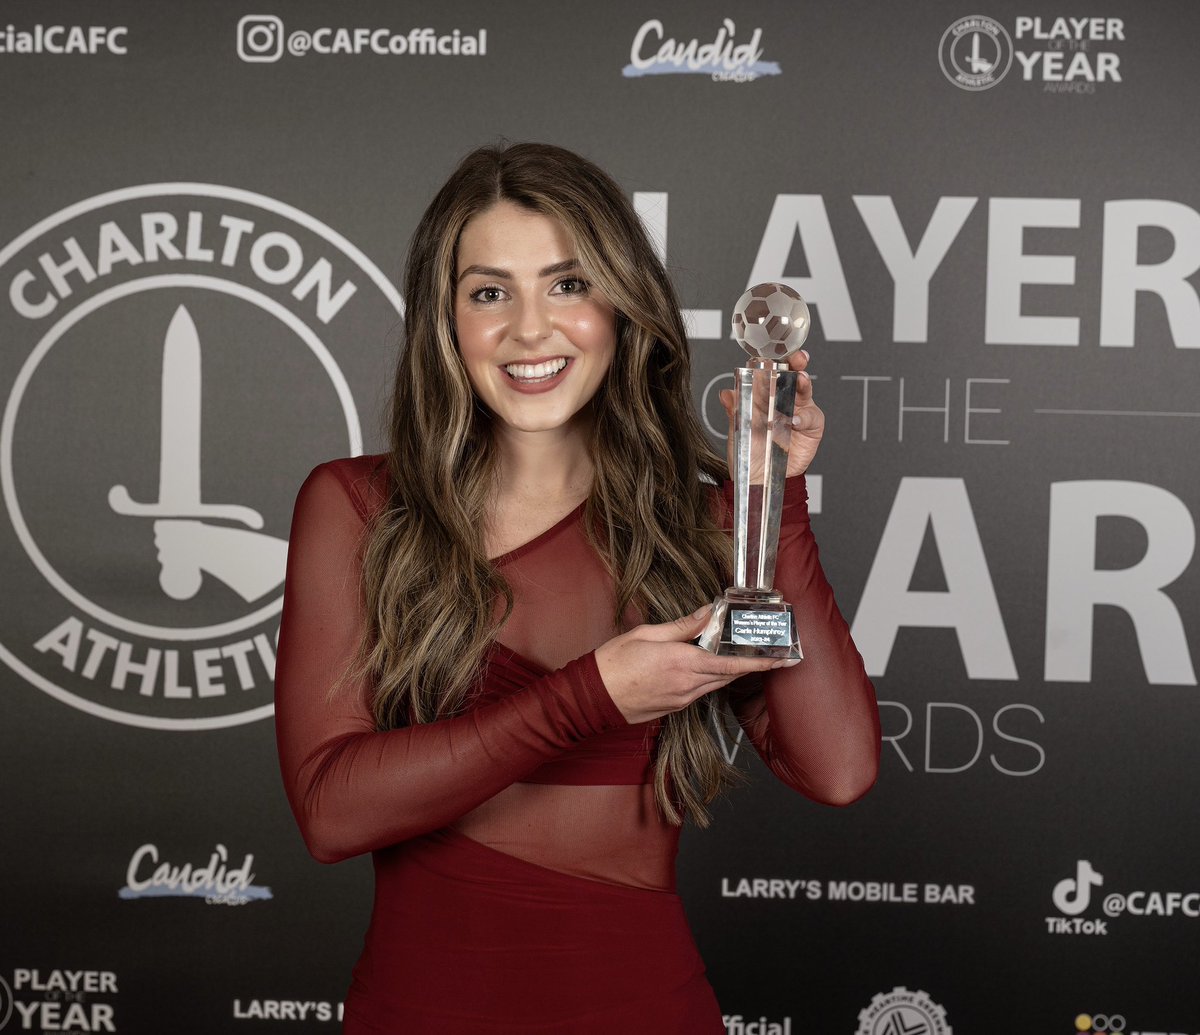 So grateful to win Player of The Year last night @cafcofficial end of season awards! Such a special group of players & staff - it’s been an honour to be part of it🥰 Big thank you to the fans who voted & have supported us throughout the season - we appreciate you a lot❤️ #UTA